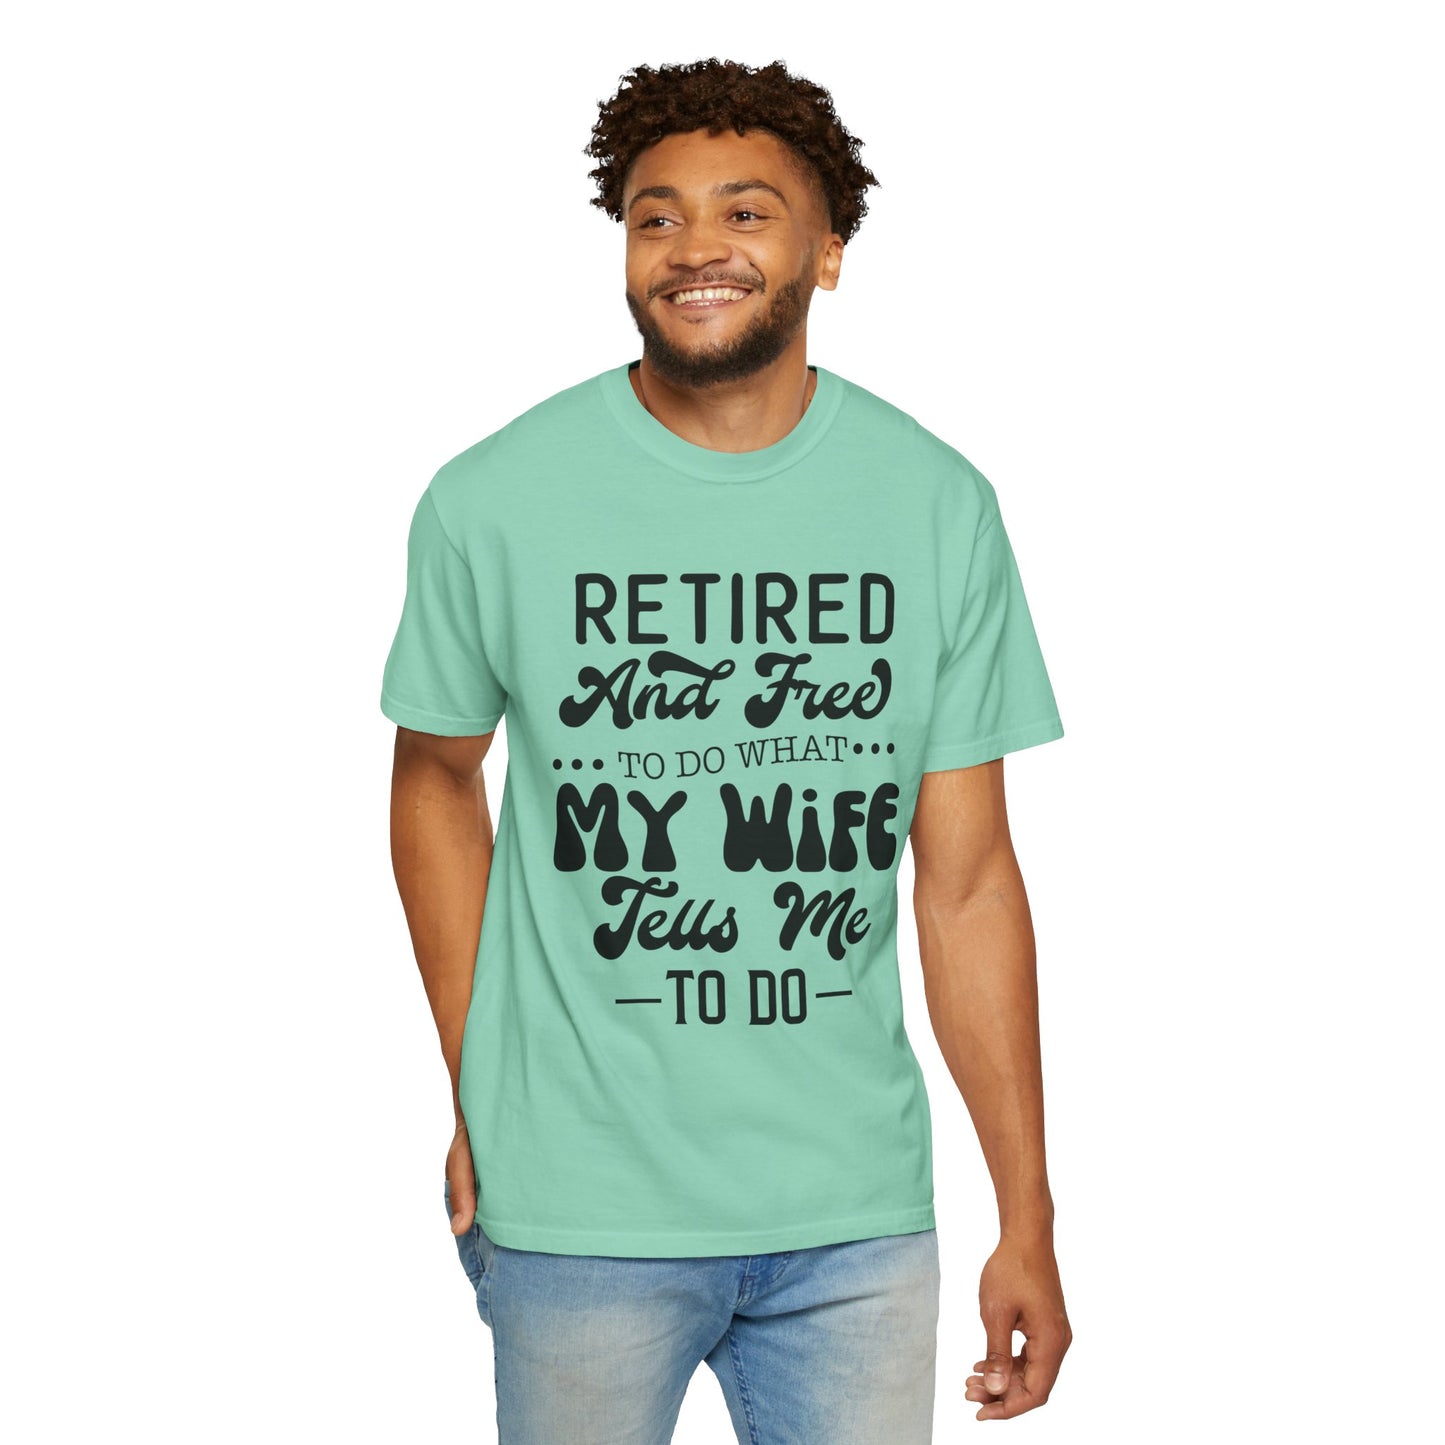 Retire and Free - Unisex Garment-Dyed T-shirt